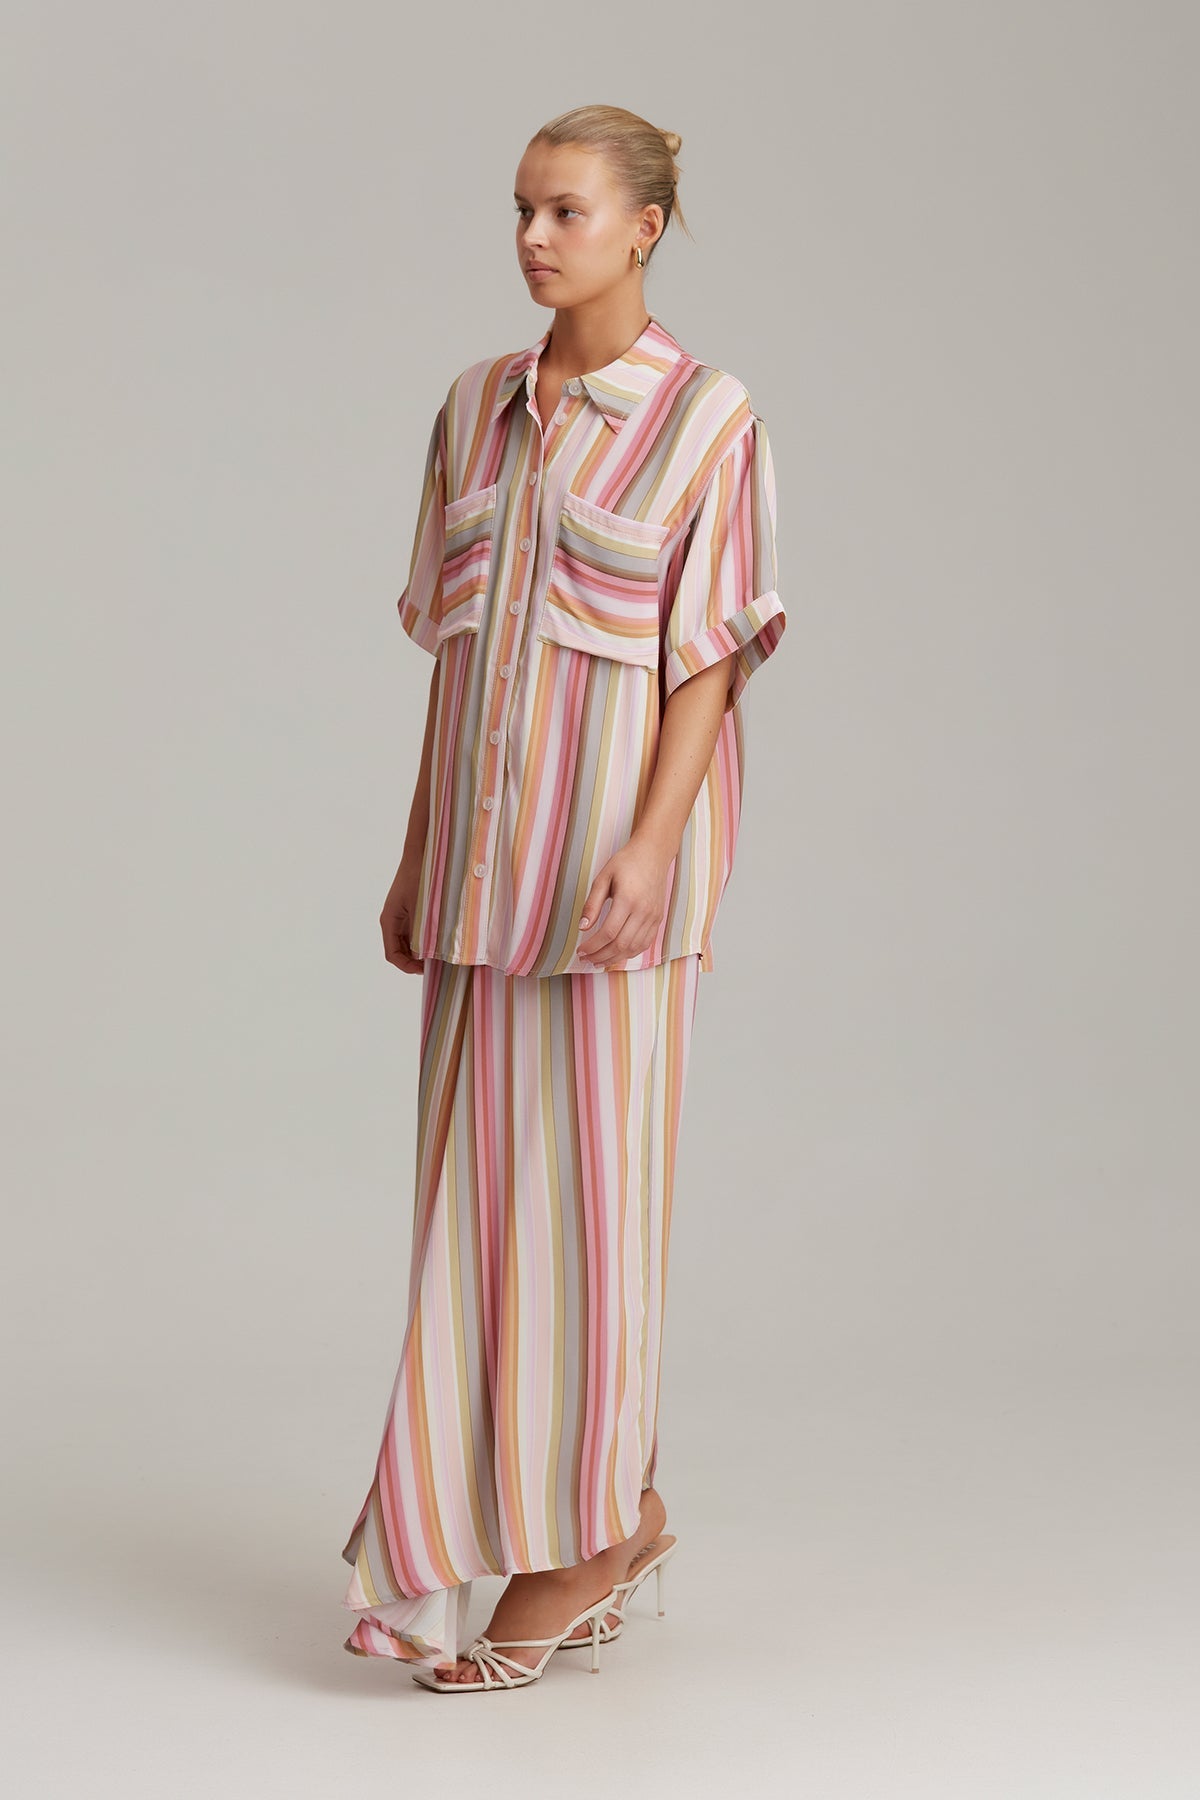 C/MEO Collective - Sincerely Shirt - Soft Stripe